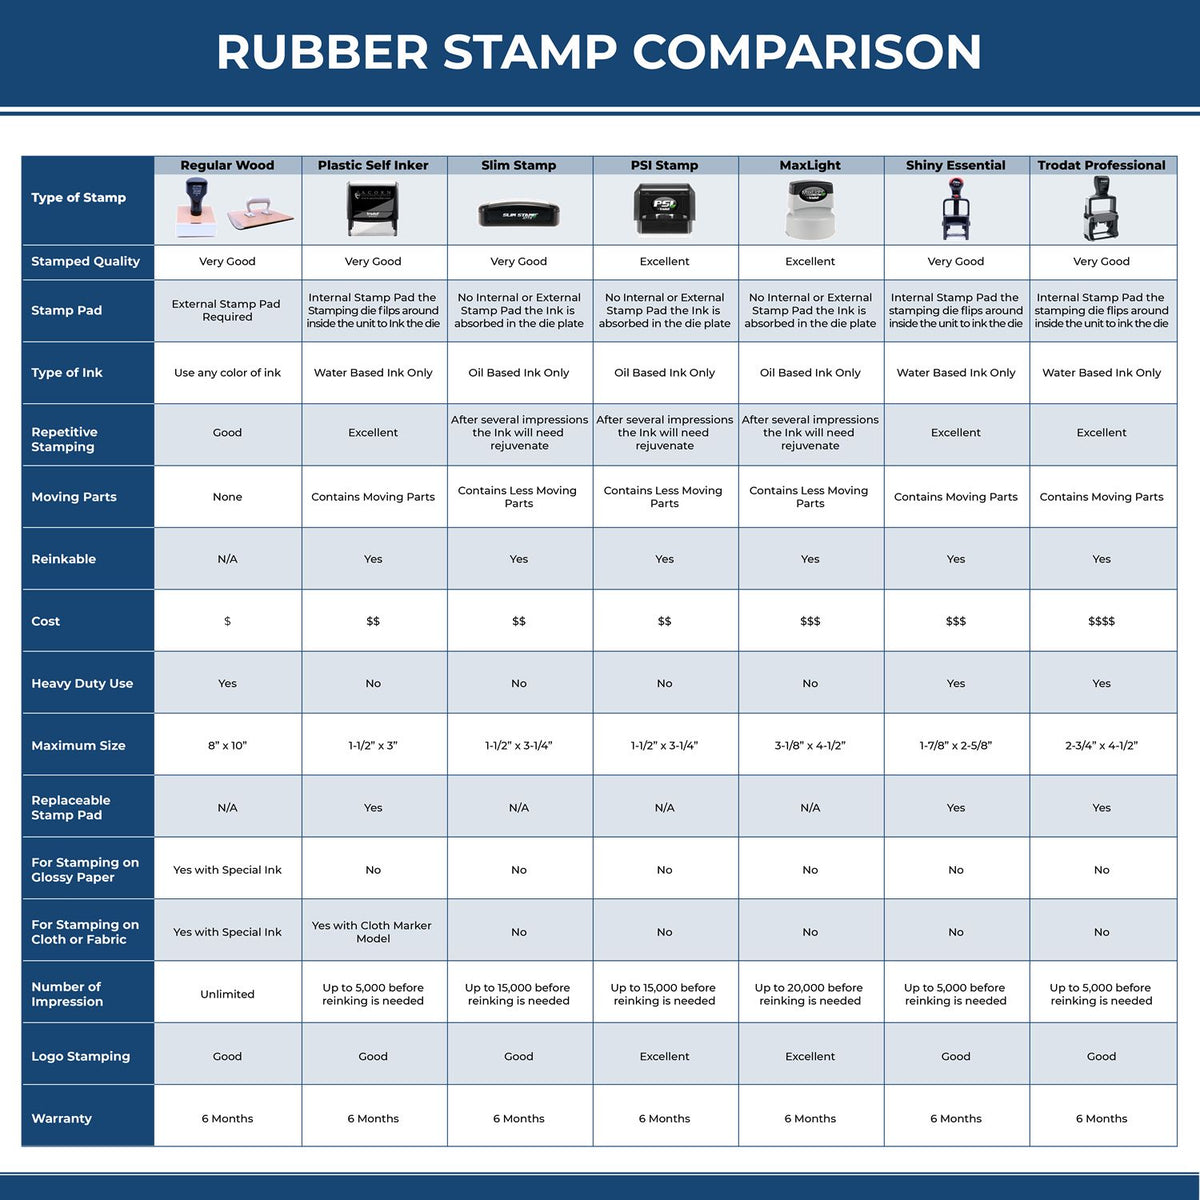 A comparison chart for the different types of mount models available for the Super Slim Wyoming Notary Public Stamp.